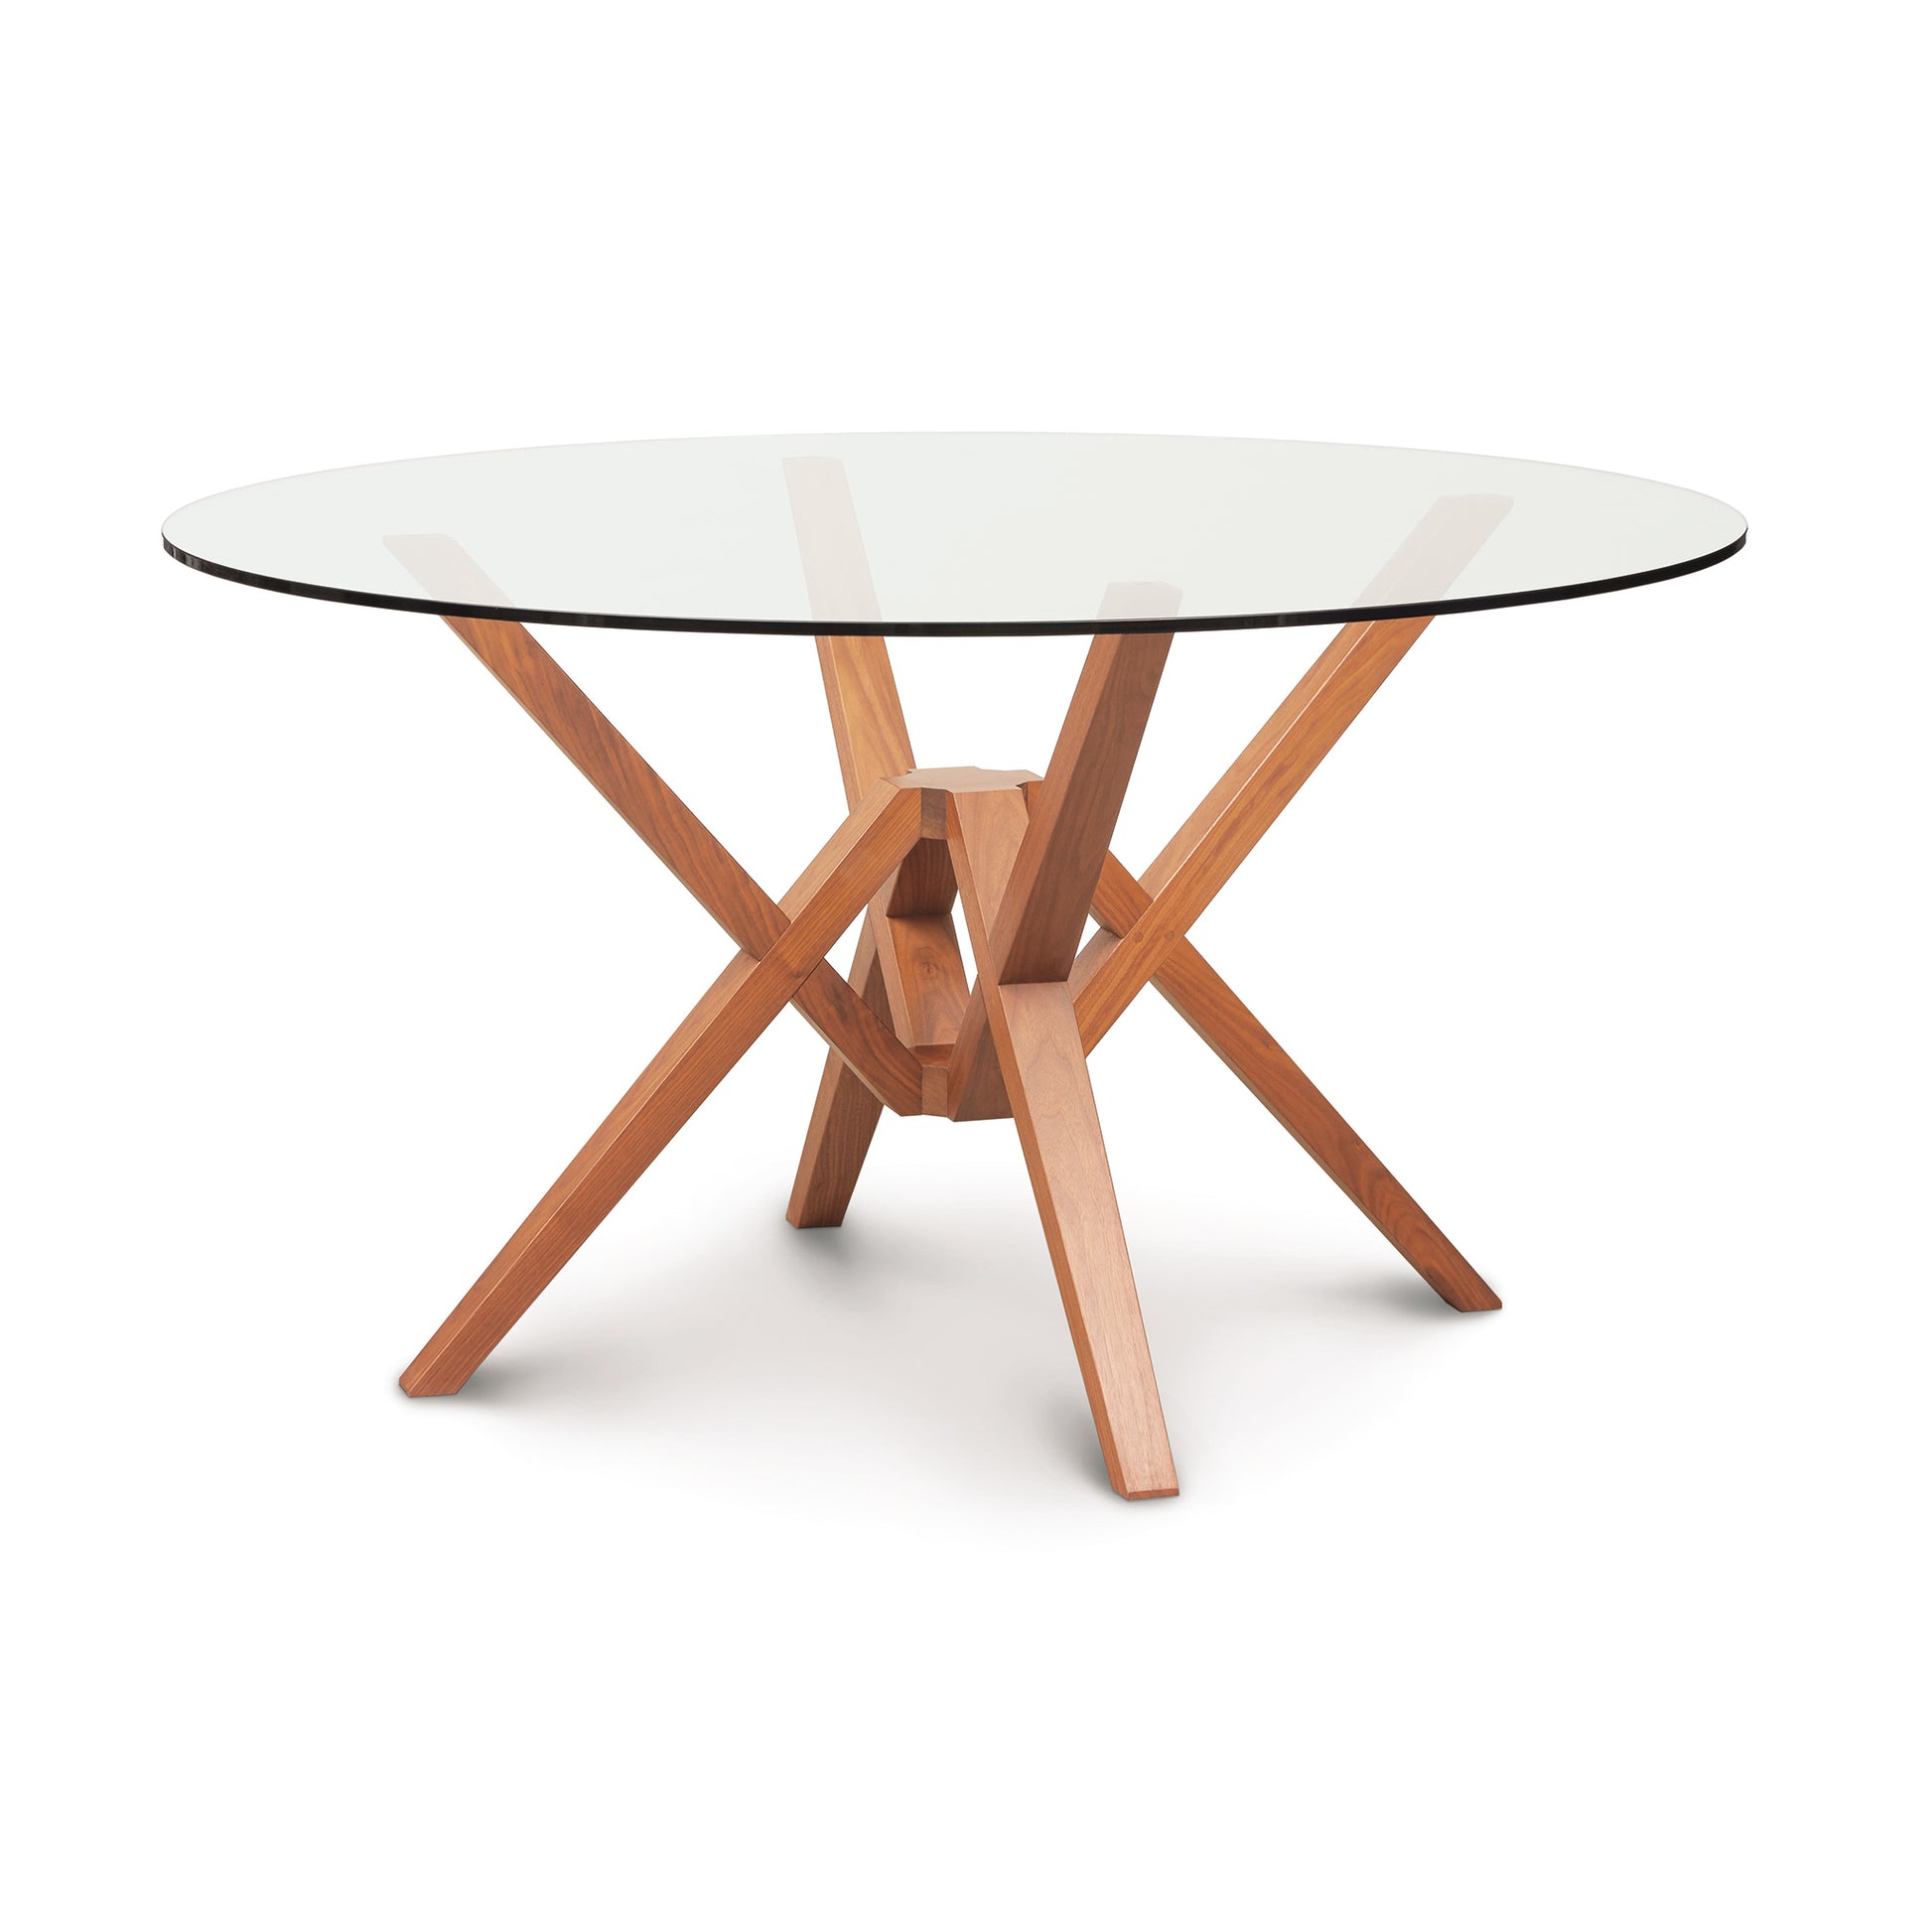 An Copeland Furniture Exeter Round Glass Top Table with a solid wood base that features an intertwined leg design crafted from sustainably harvested hardwoods.